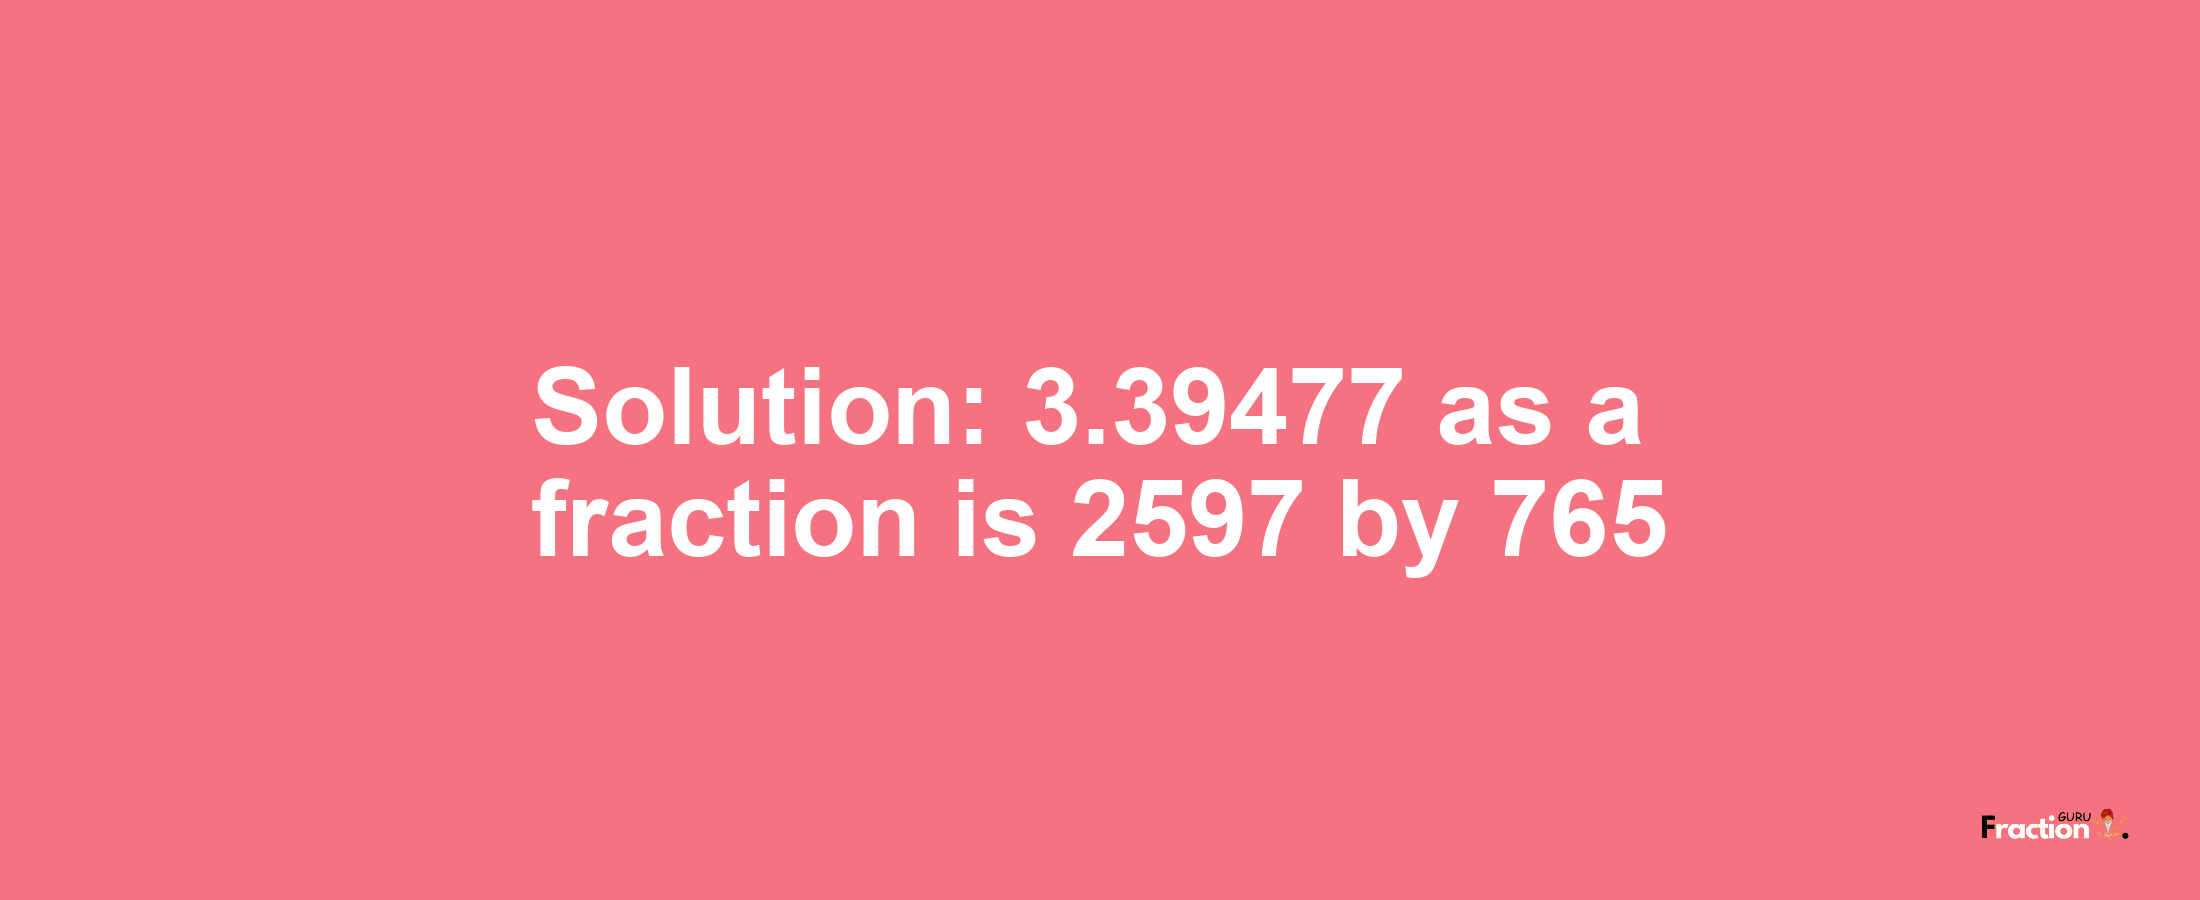 Solution:3.39477 as a fraction is 2597/765